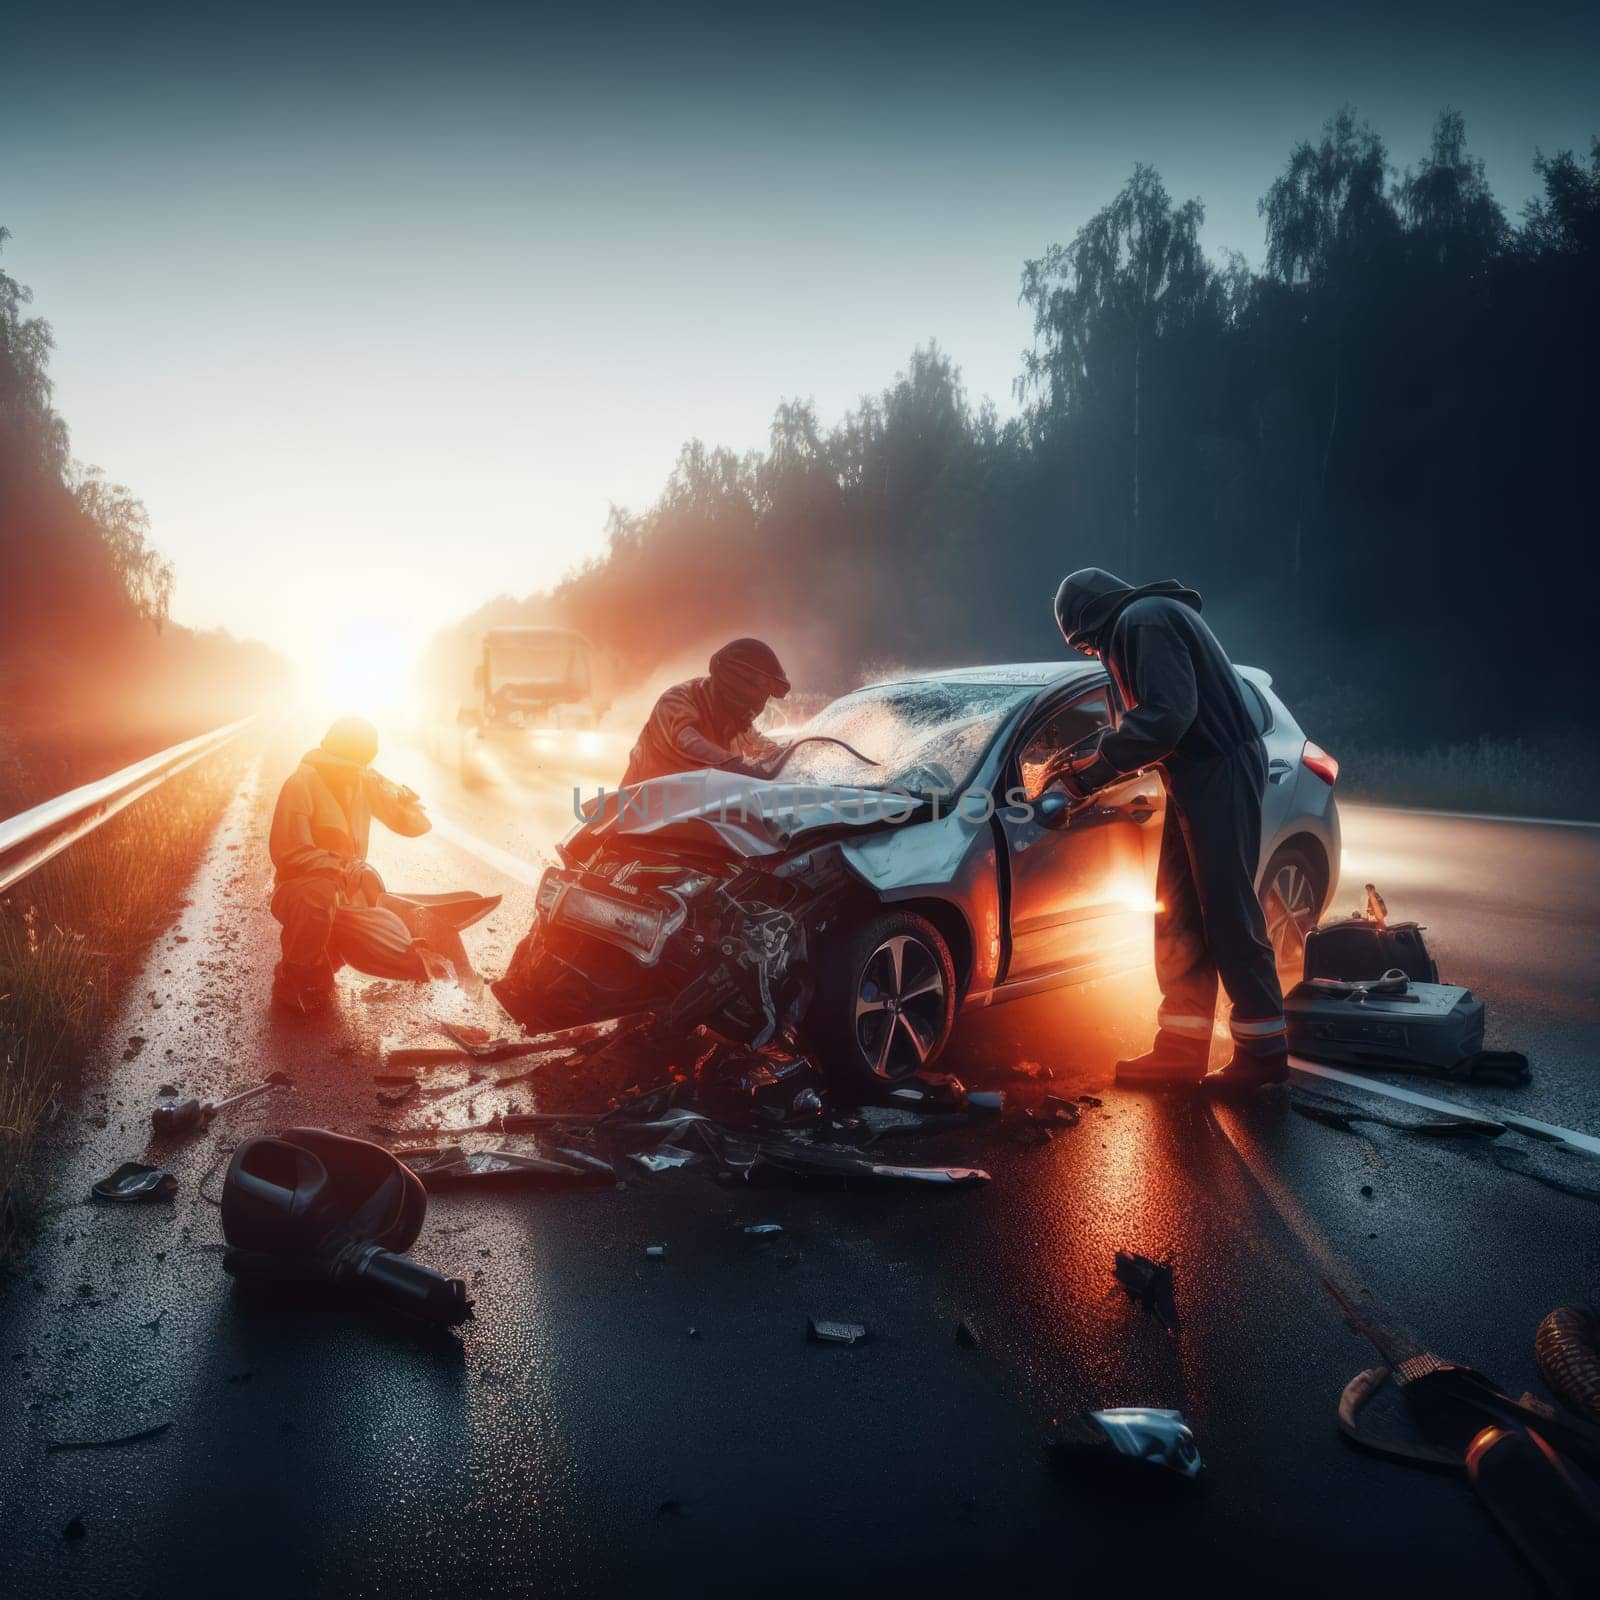 A car accident scene on a highway at dawn, with a severely damaged vehicle and people working on it